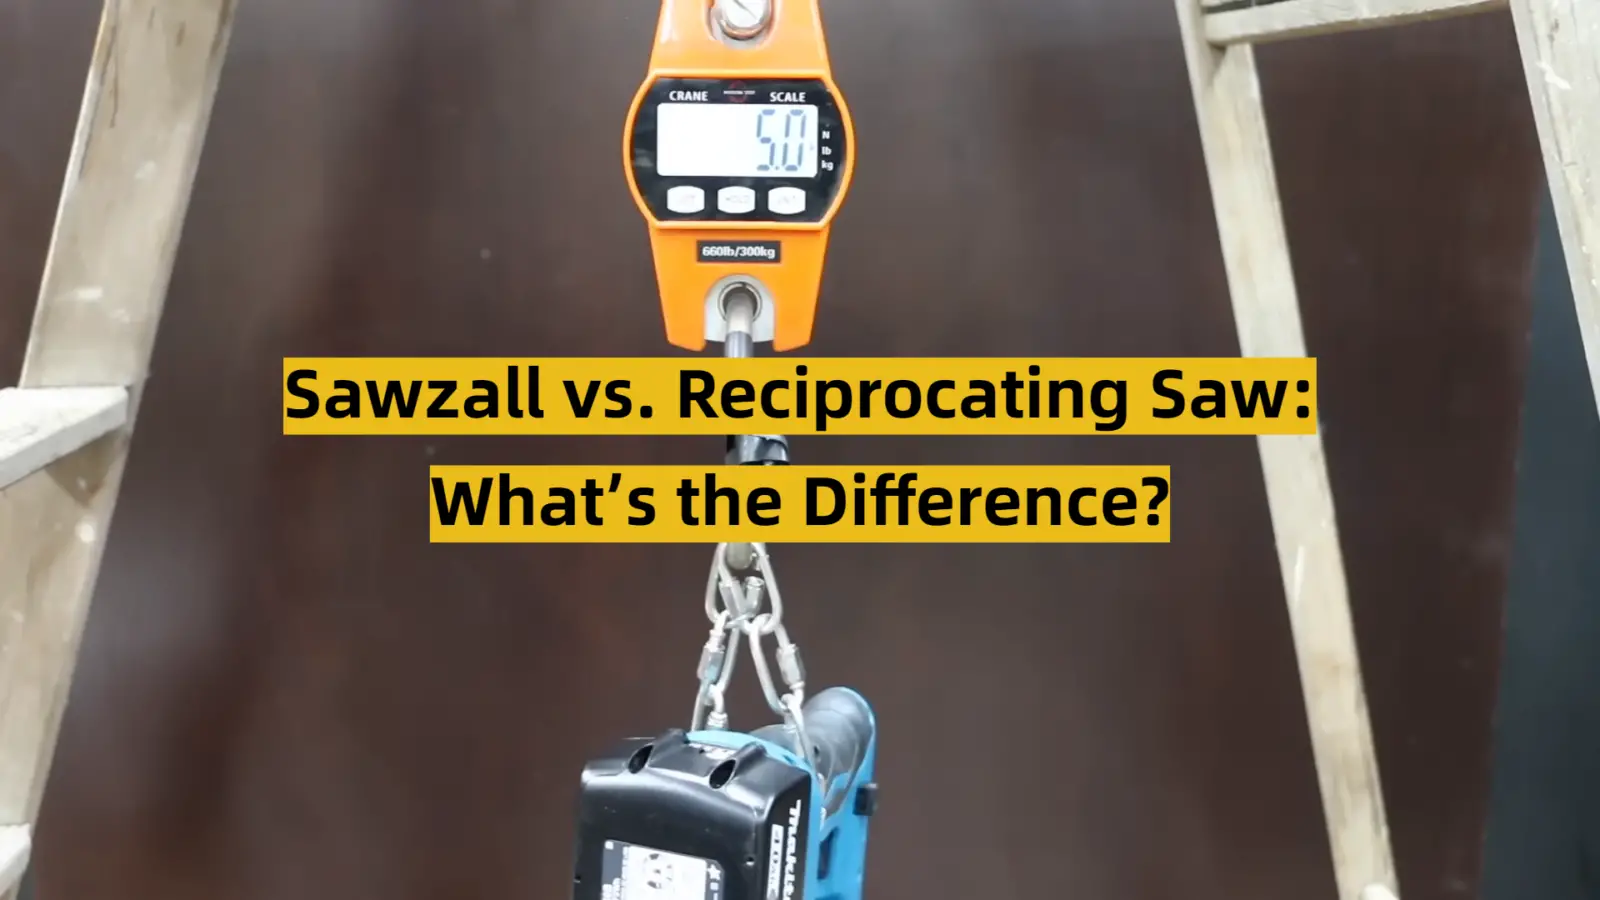 Sawzall vs. Reciprocating Saw: What’s the Difference?